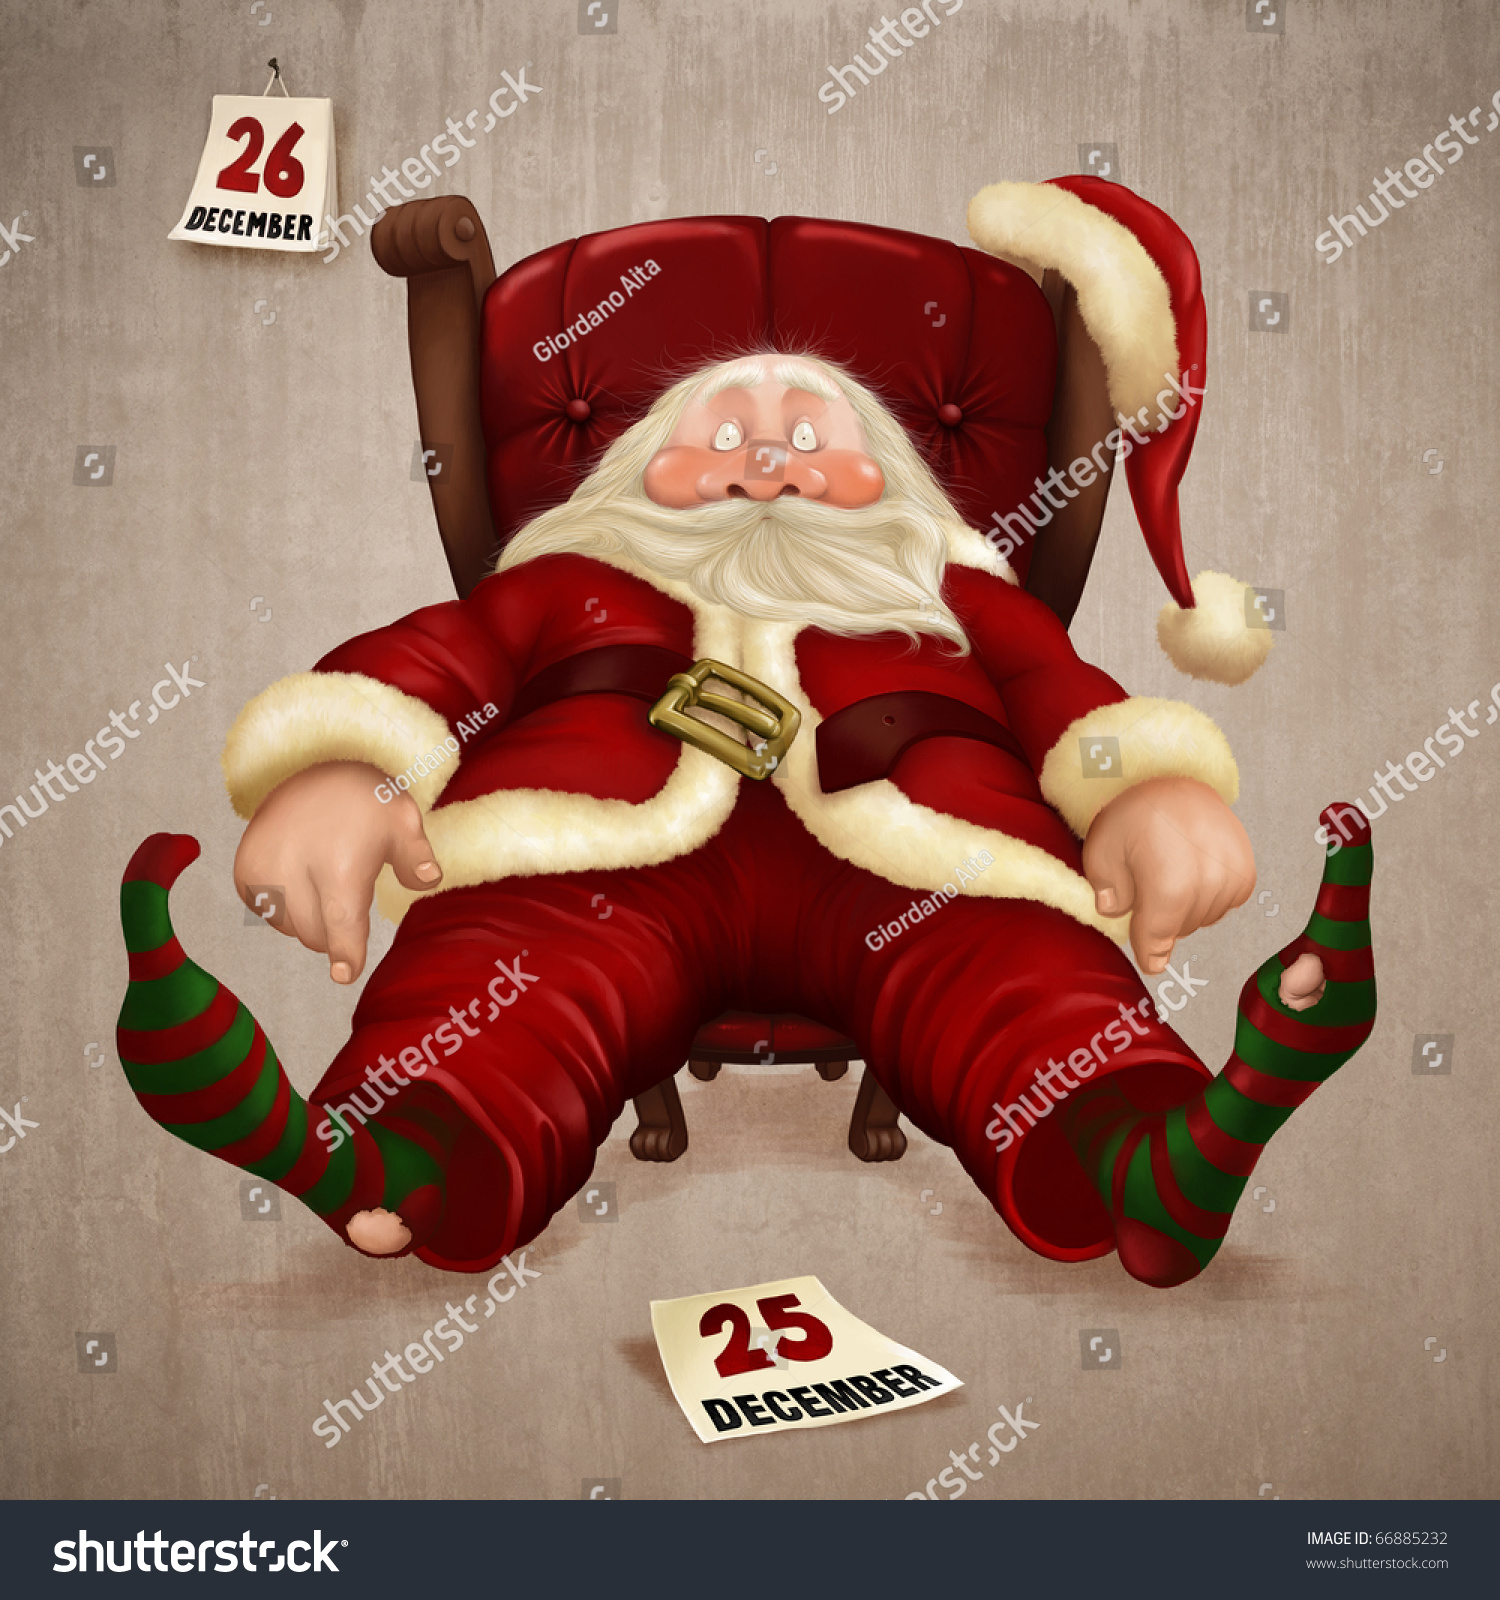 Tired Santa Claus The Day After Christmas Stock Photo 66885232 : Shutterstock